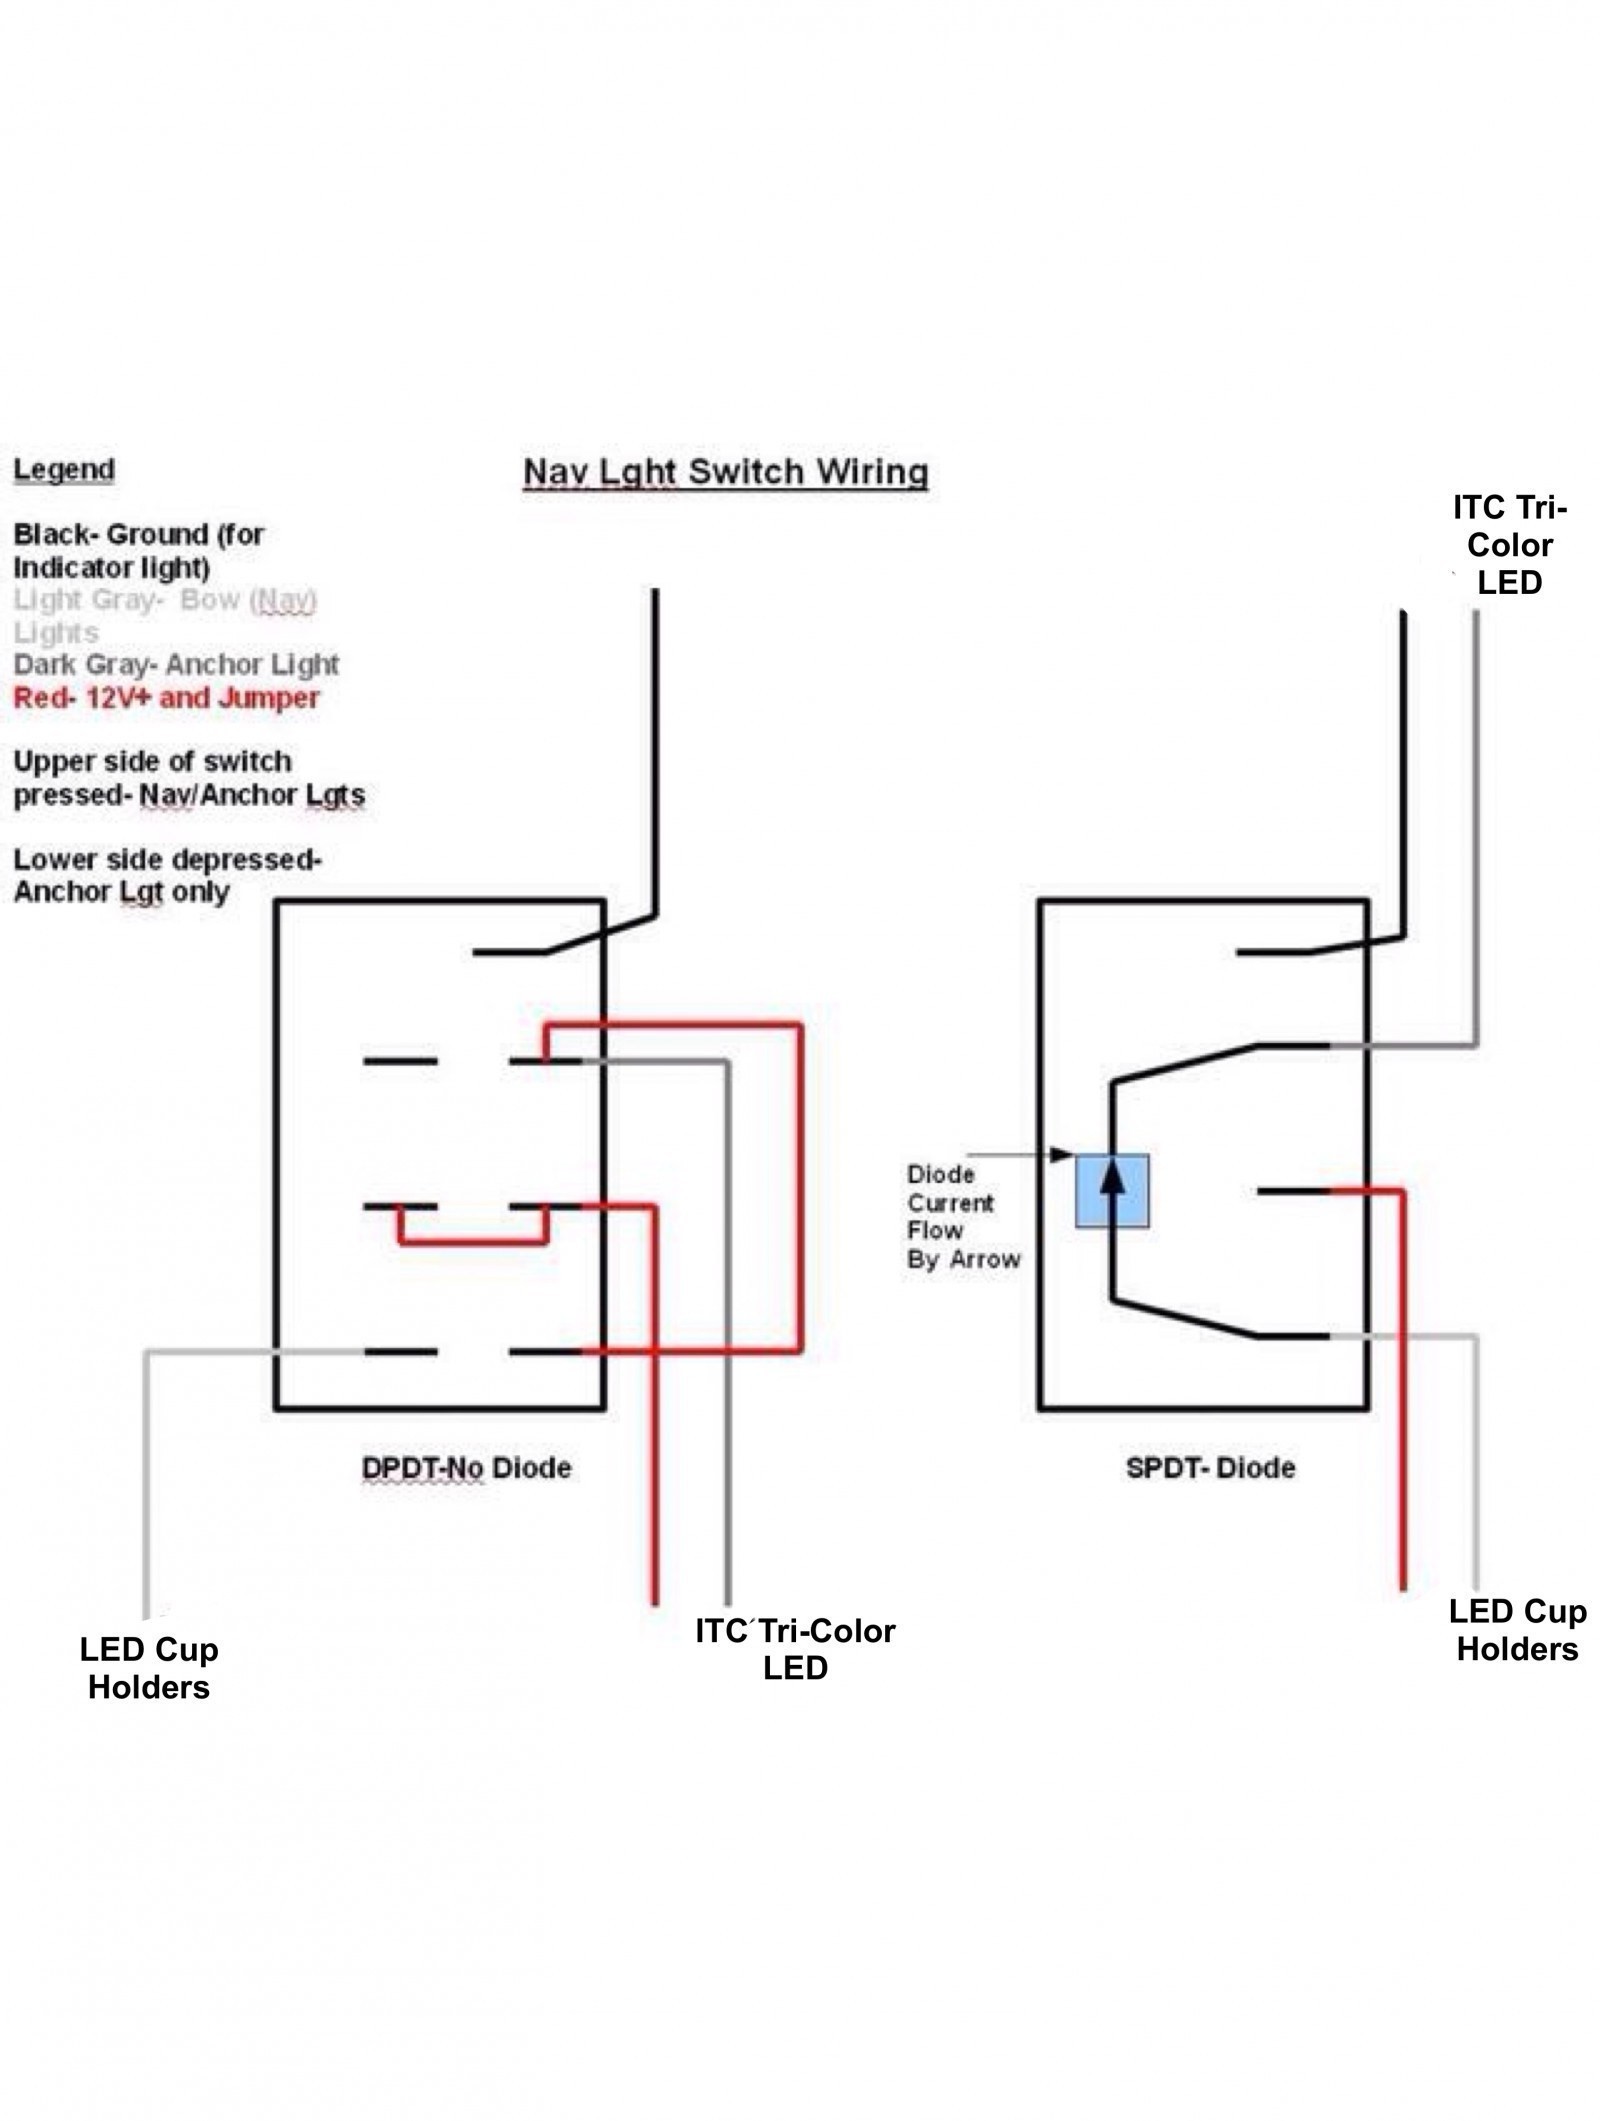 free wiring diagram Wiring Diagram For Single Pole Switch With Pilot Light Save Wiring Leviton